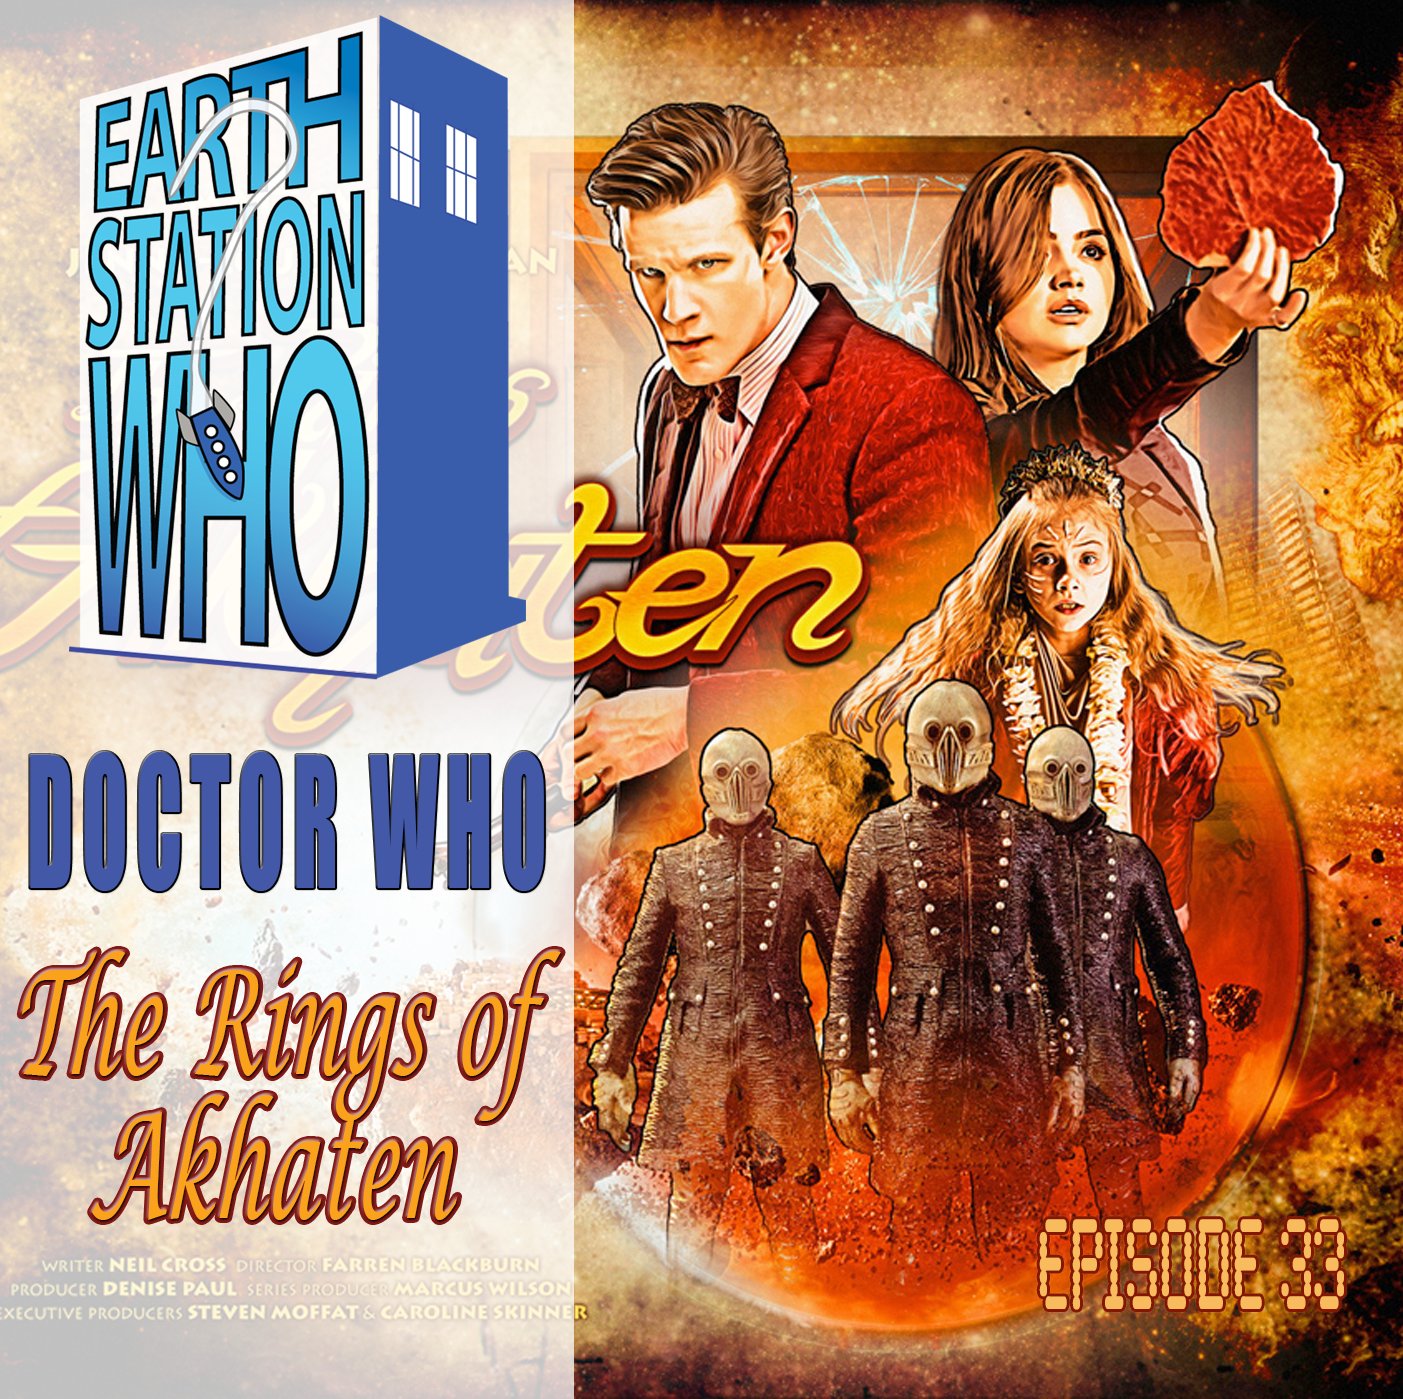 Earth Station Who Episode 33